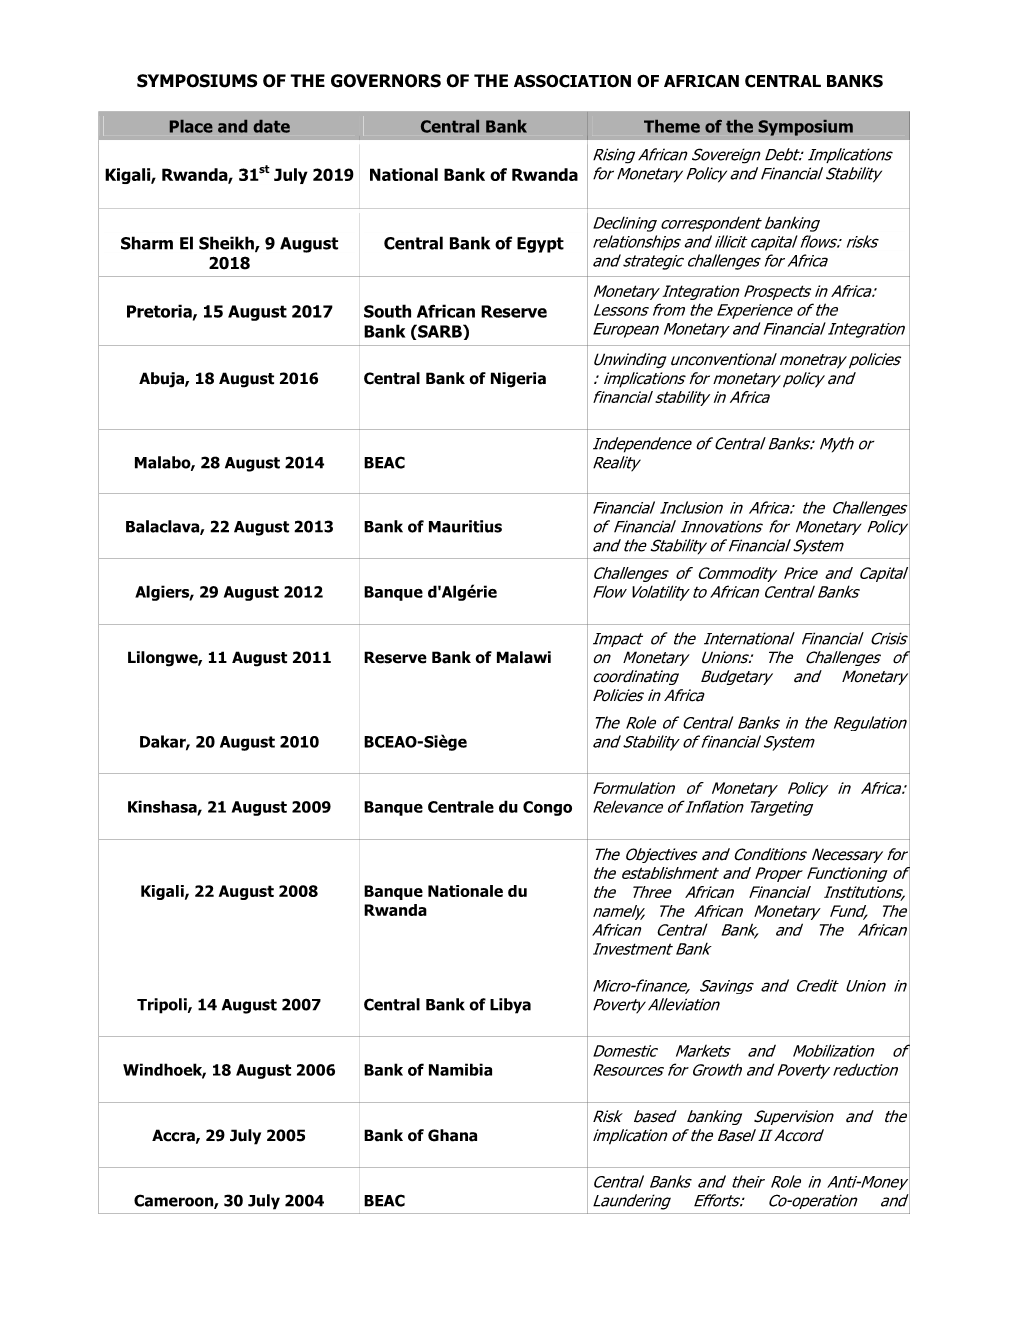 Symposiums of the Governors of the Association of African Central Banks